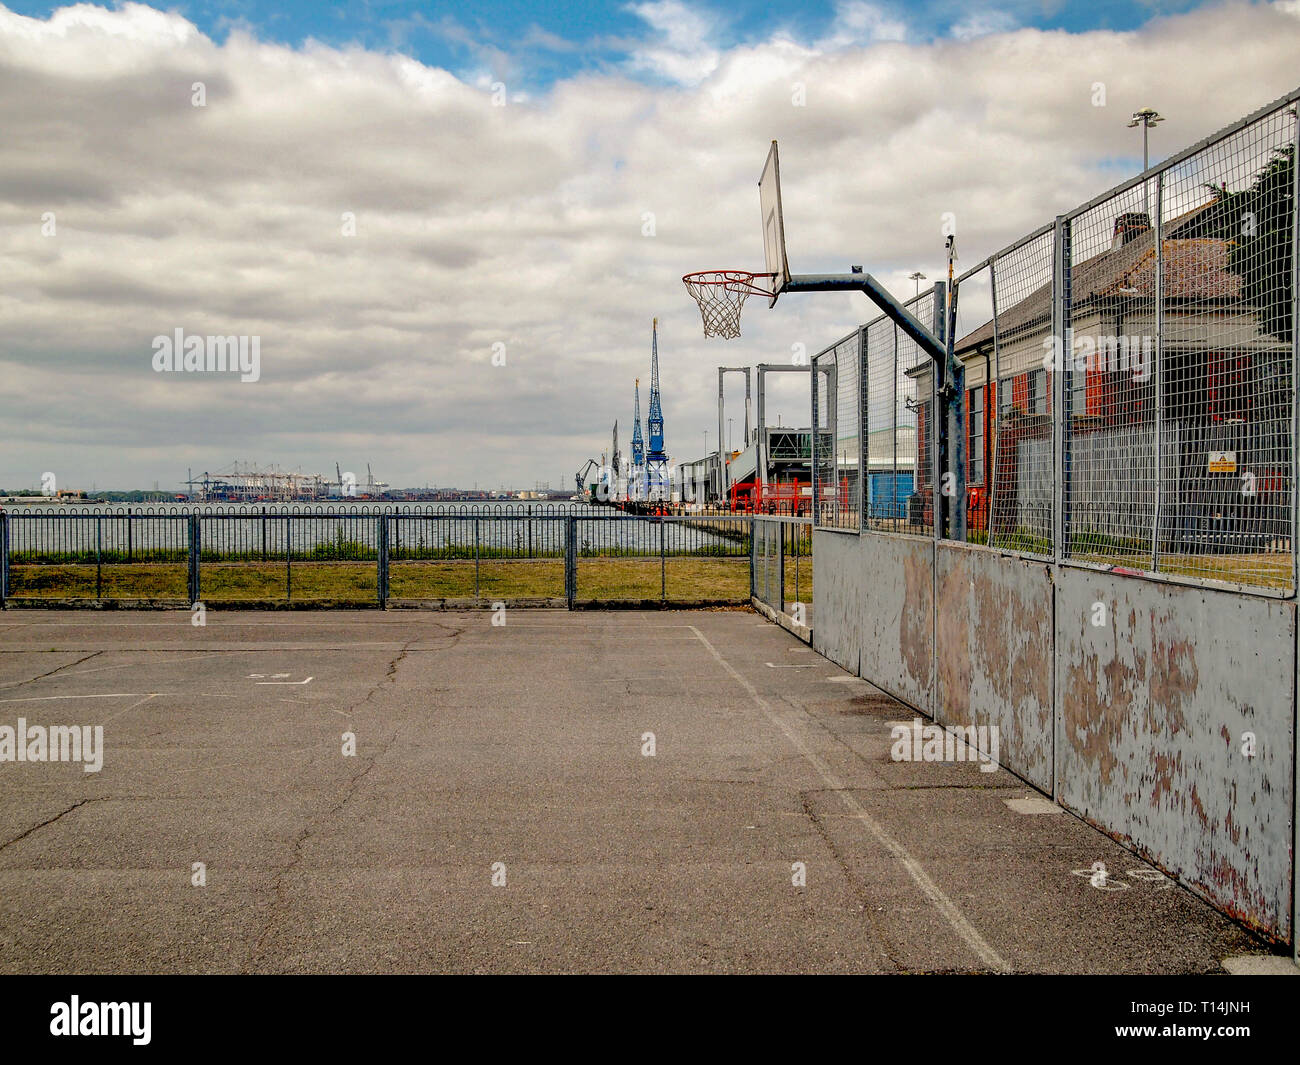 A basketball court in a run down part of a city next to a sea port Stock Photo